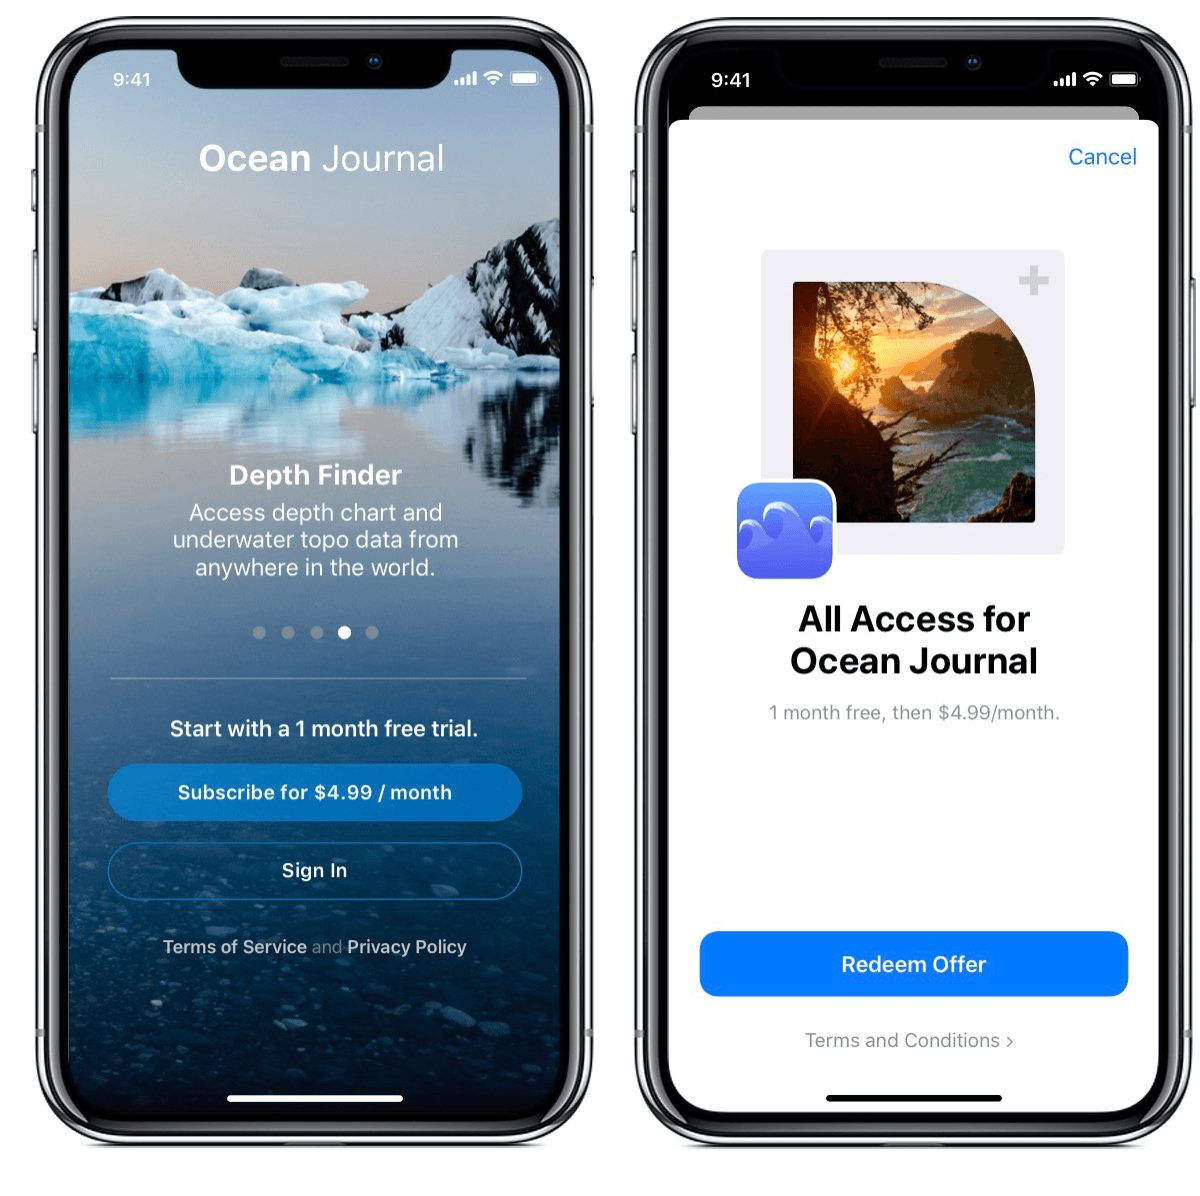  Subscription OffersThis was not possible until late 2020. Now you can provide free or discounted prices for auto-renewable subscriptions. Great to fight churn and win back subscribers https://developer.apple.com/news/?id=g20wyc9c